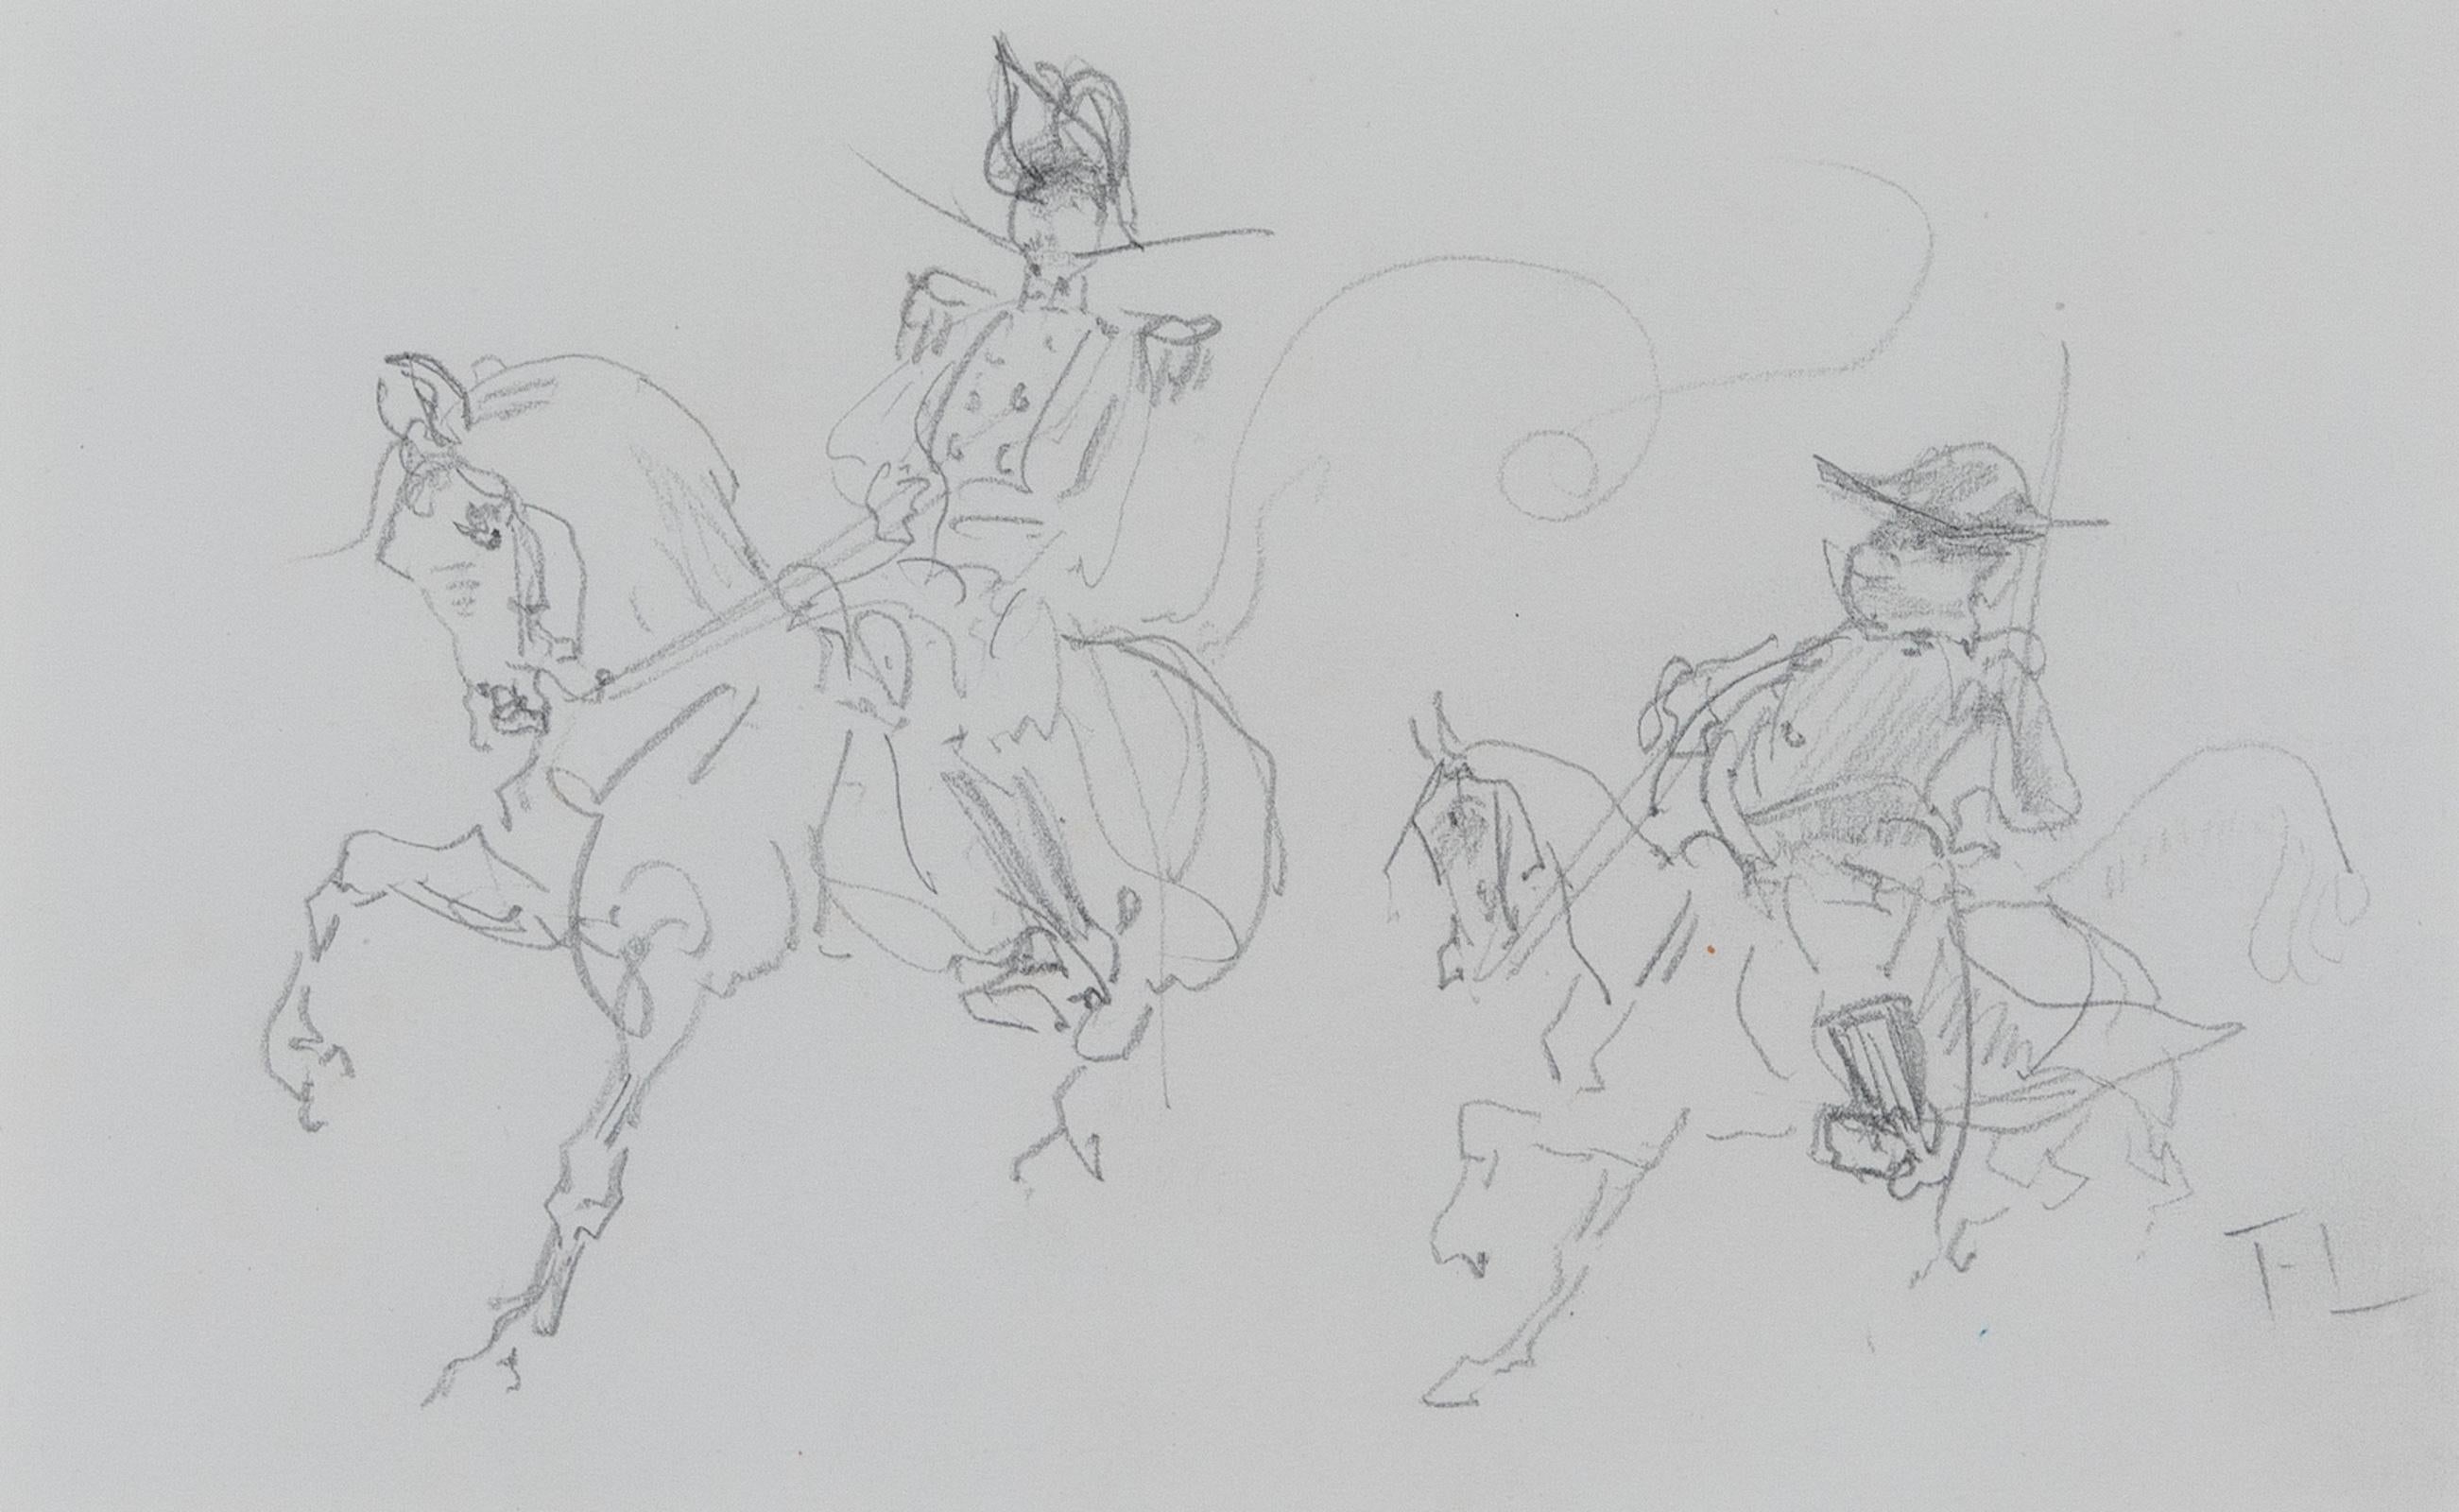 Cavaliers by Henri de Toulouse-Lautrec (1864-1901)
Pencil on paper
15.7 x 25.4 cm (6 ¹/₈ x 10 inches)
Inscribed with intials lower right, TL

This work on paper is characteristic of the artist as the horse is very much a hallmark within Lautrec's